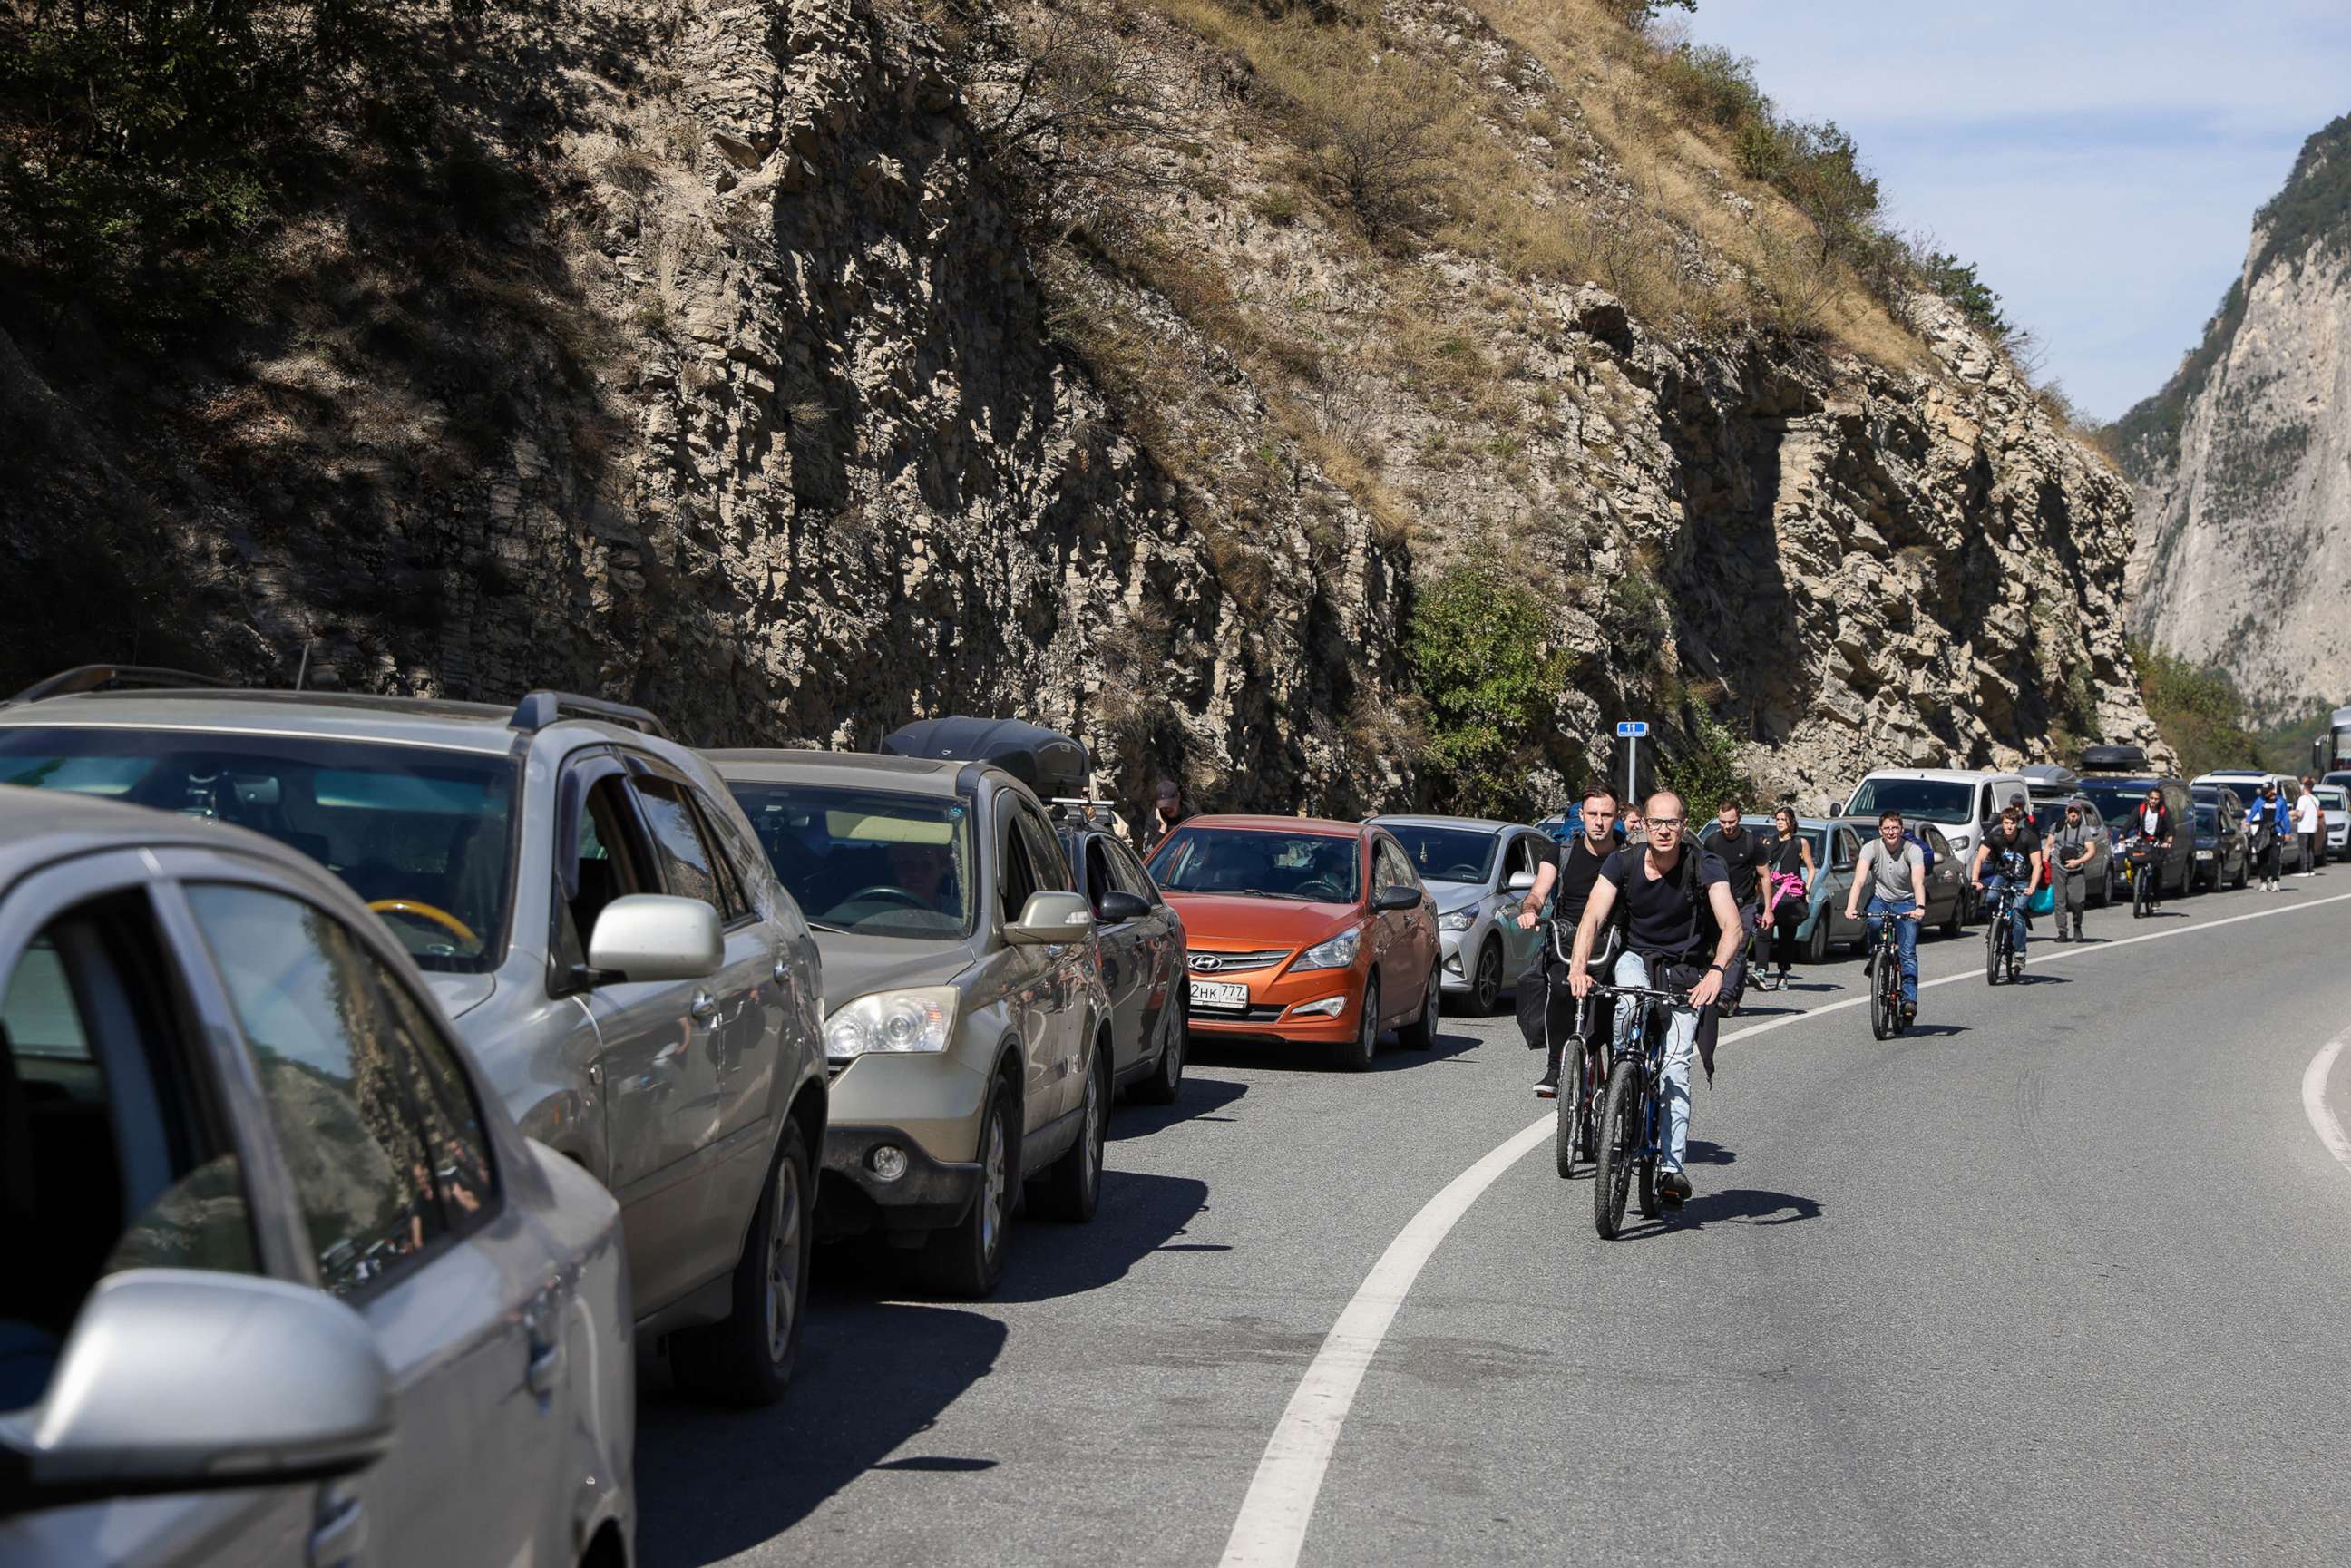 PHOTO: People ride bicycles along a queue of vehicles at the Verkhny Lars checkpoint in North Ossetia, Russia on the border to Georgia, on Sept. 27, 2022. Around 3.5 thousand cars are queueing at the checkpoint to cross the border from Russia to Georgia.